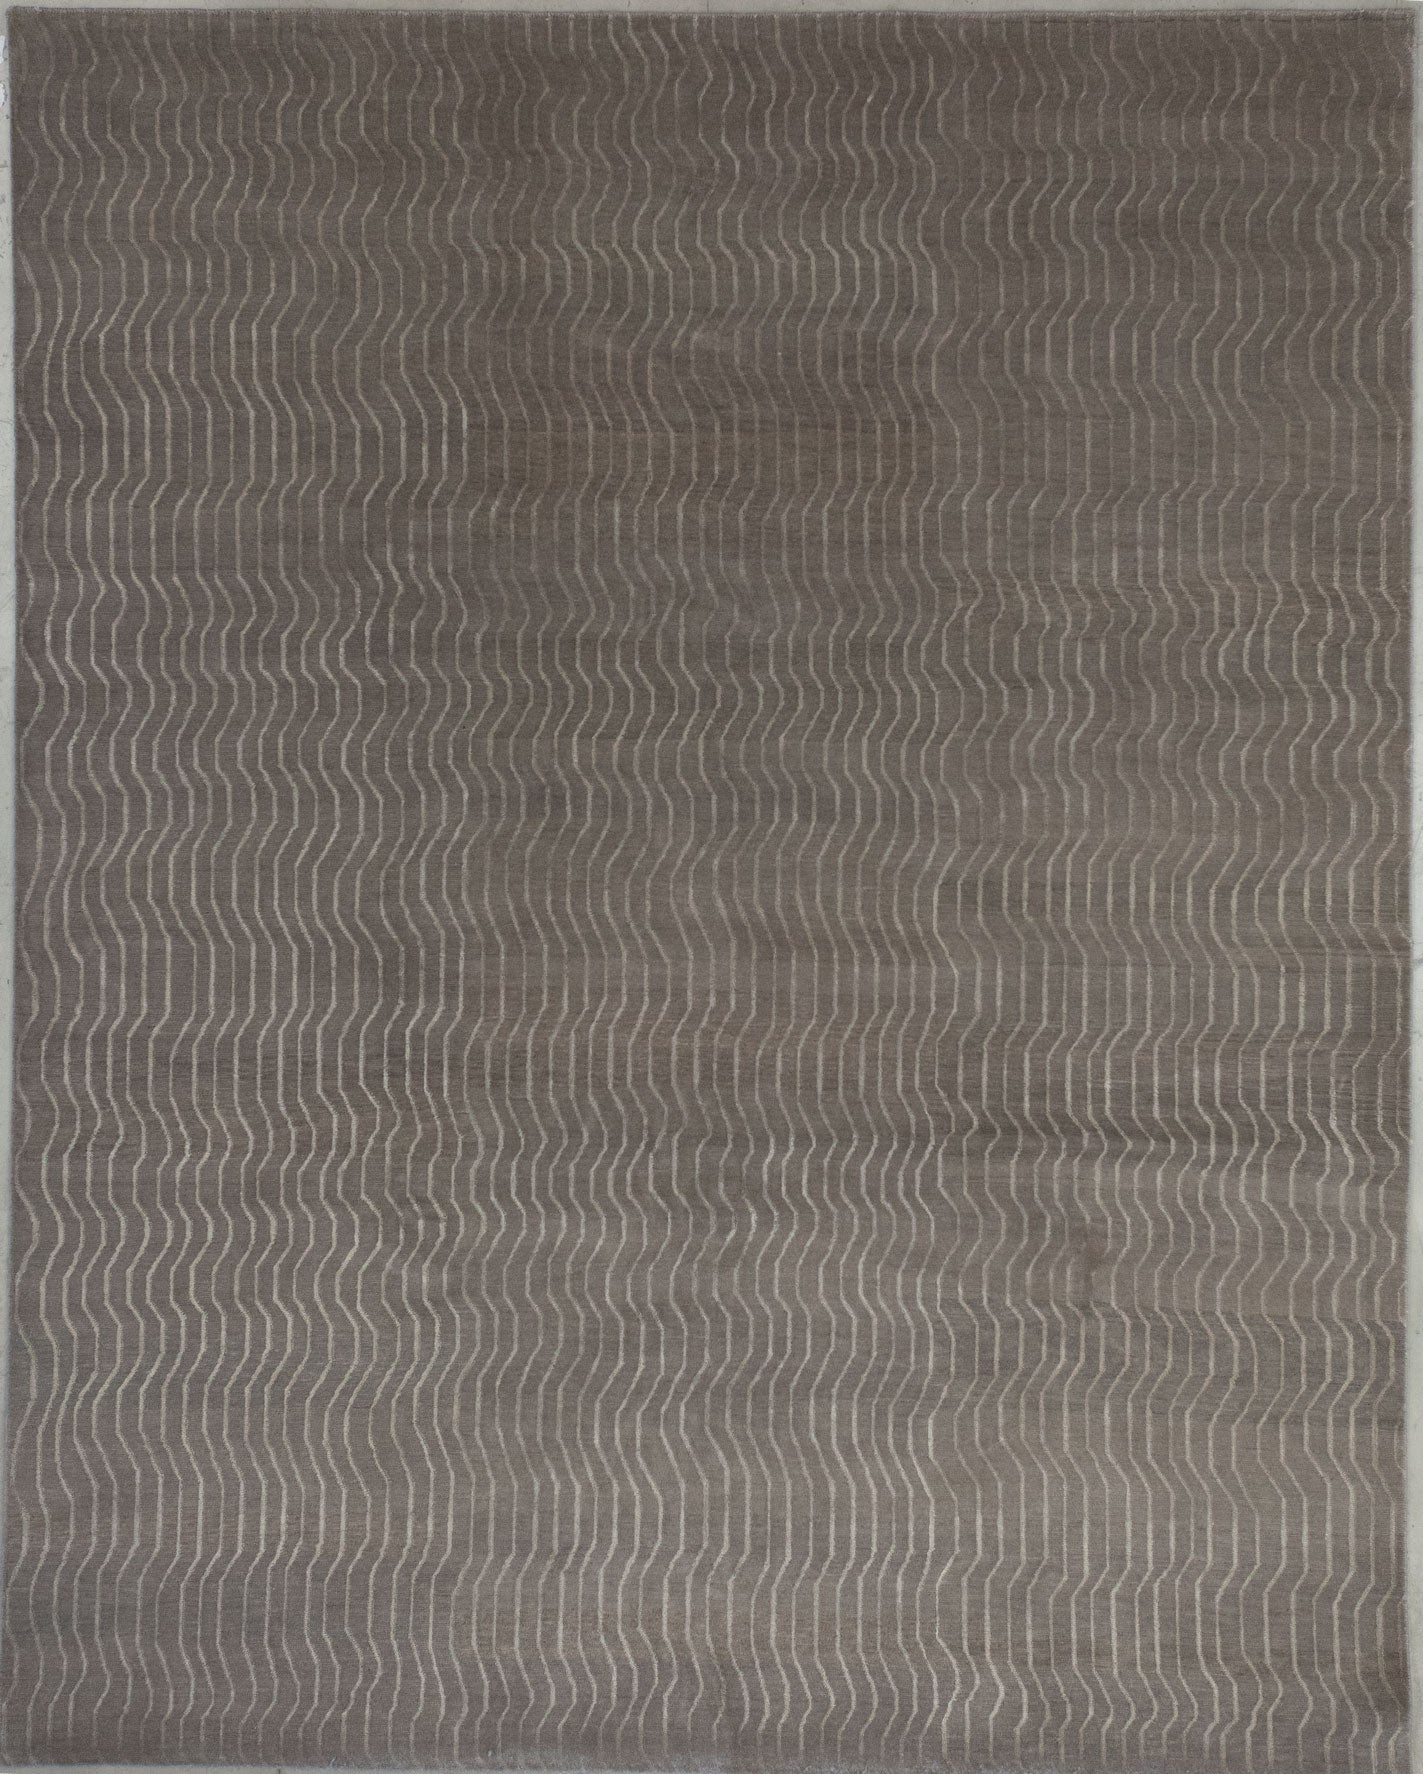 Elegant rug comes in monochromatic gray; the background has a dark tone while the pattern renders lighter vertical wave lines